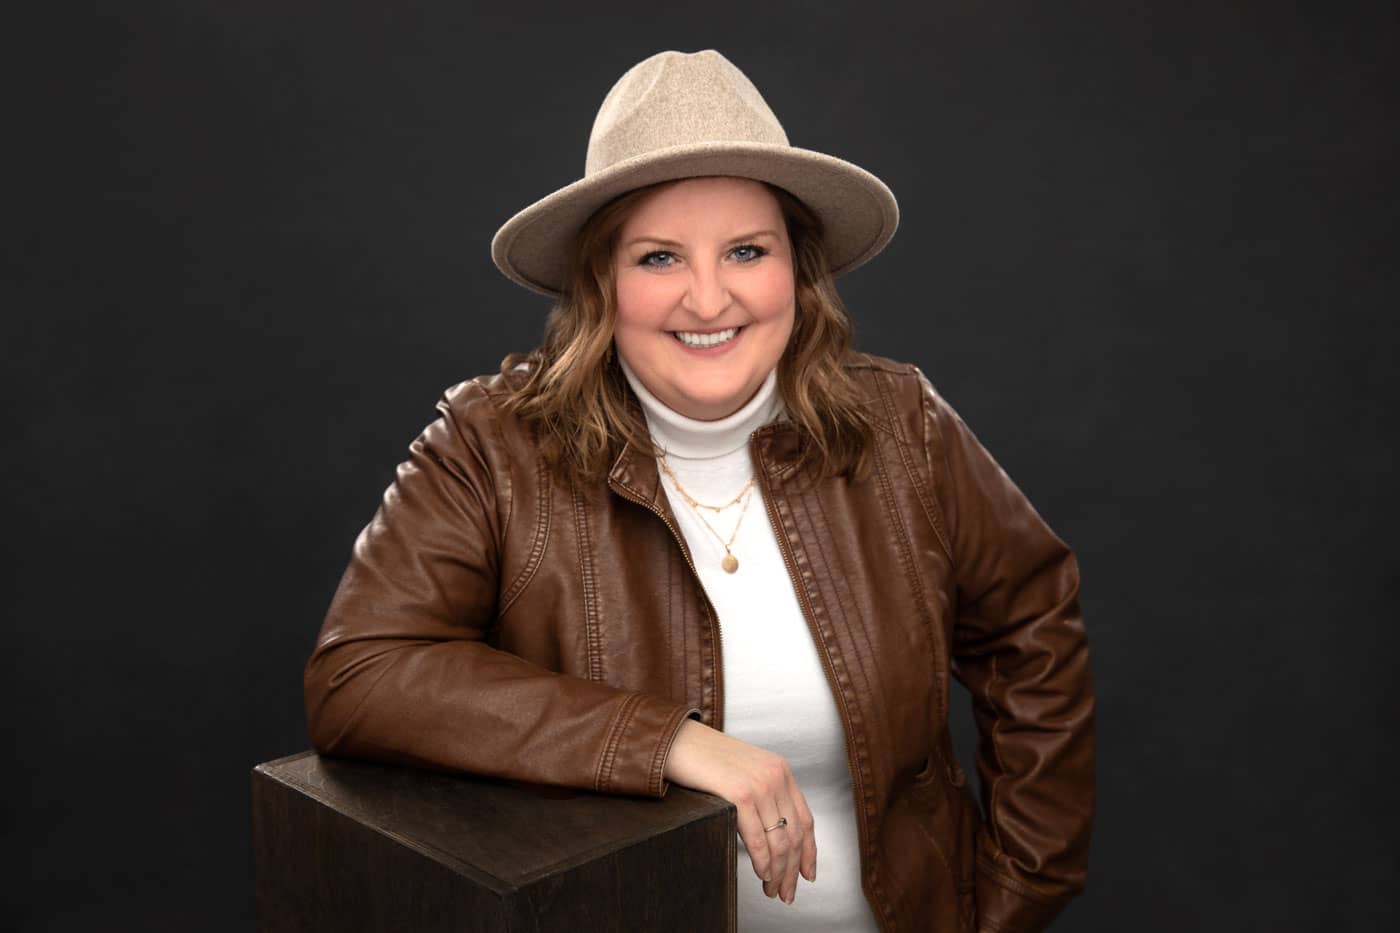 Branding photo of a pretty, smiling young woman with brown hair leaning on a box waring a white turtle neck, brown coat and a tan hat. Katie Klaiber Personal Branding Photography.